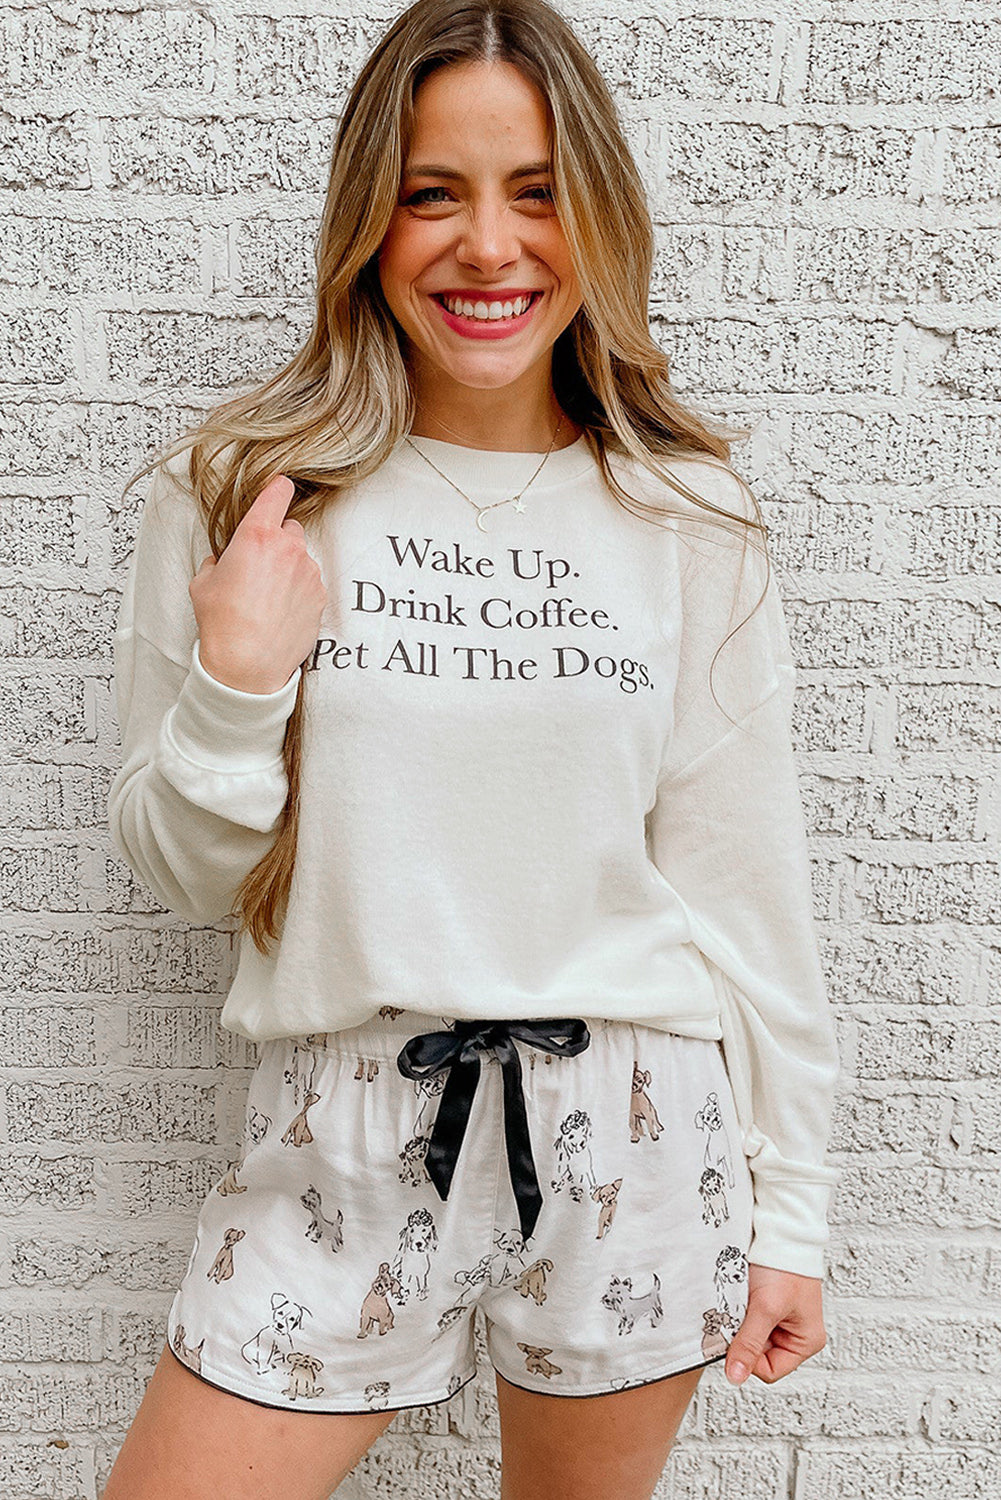 White Long Sleeve Letters Pullover and Animal Shorts Lounge Set